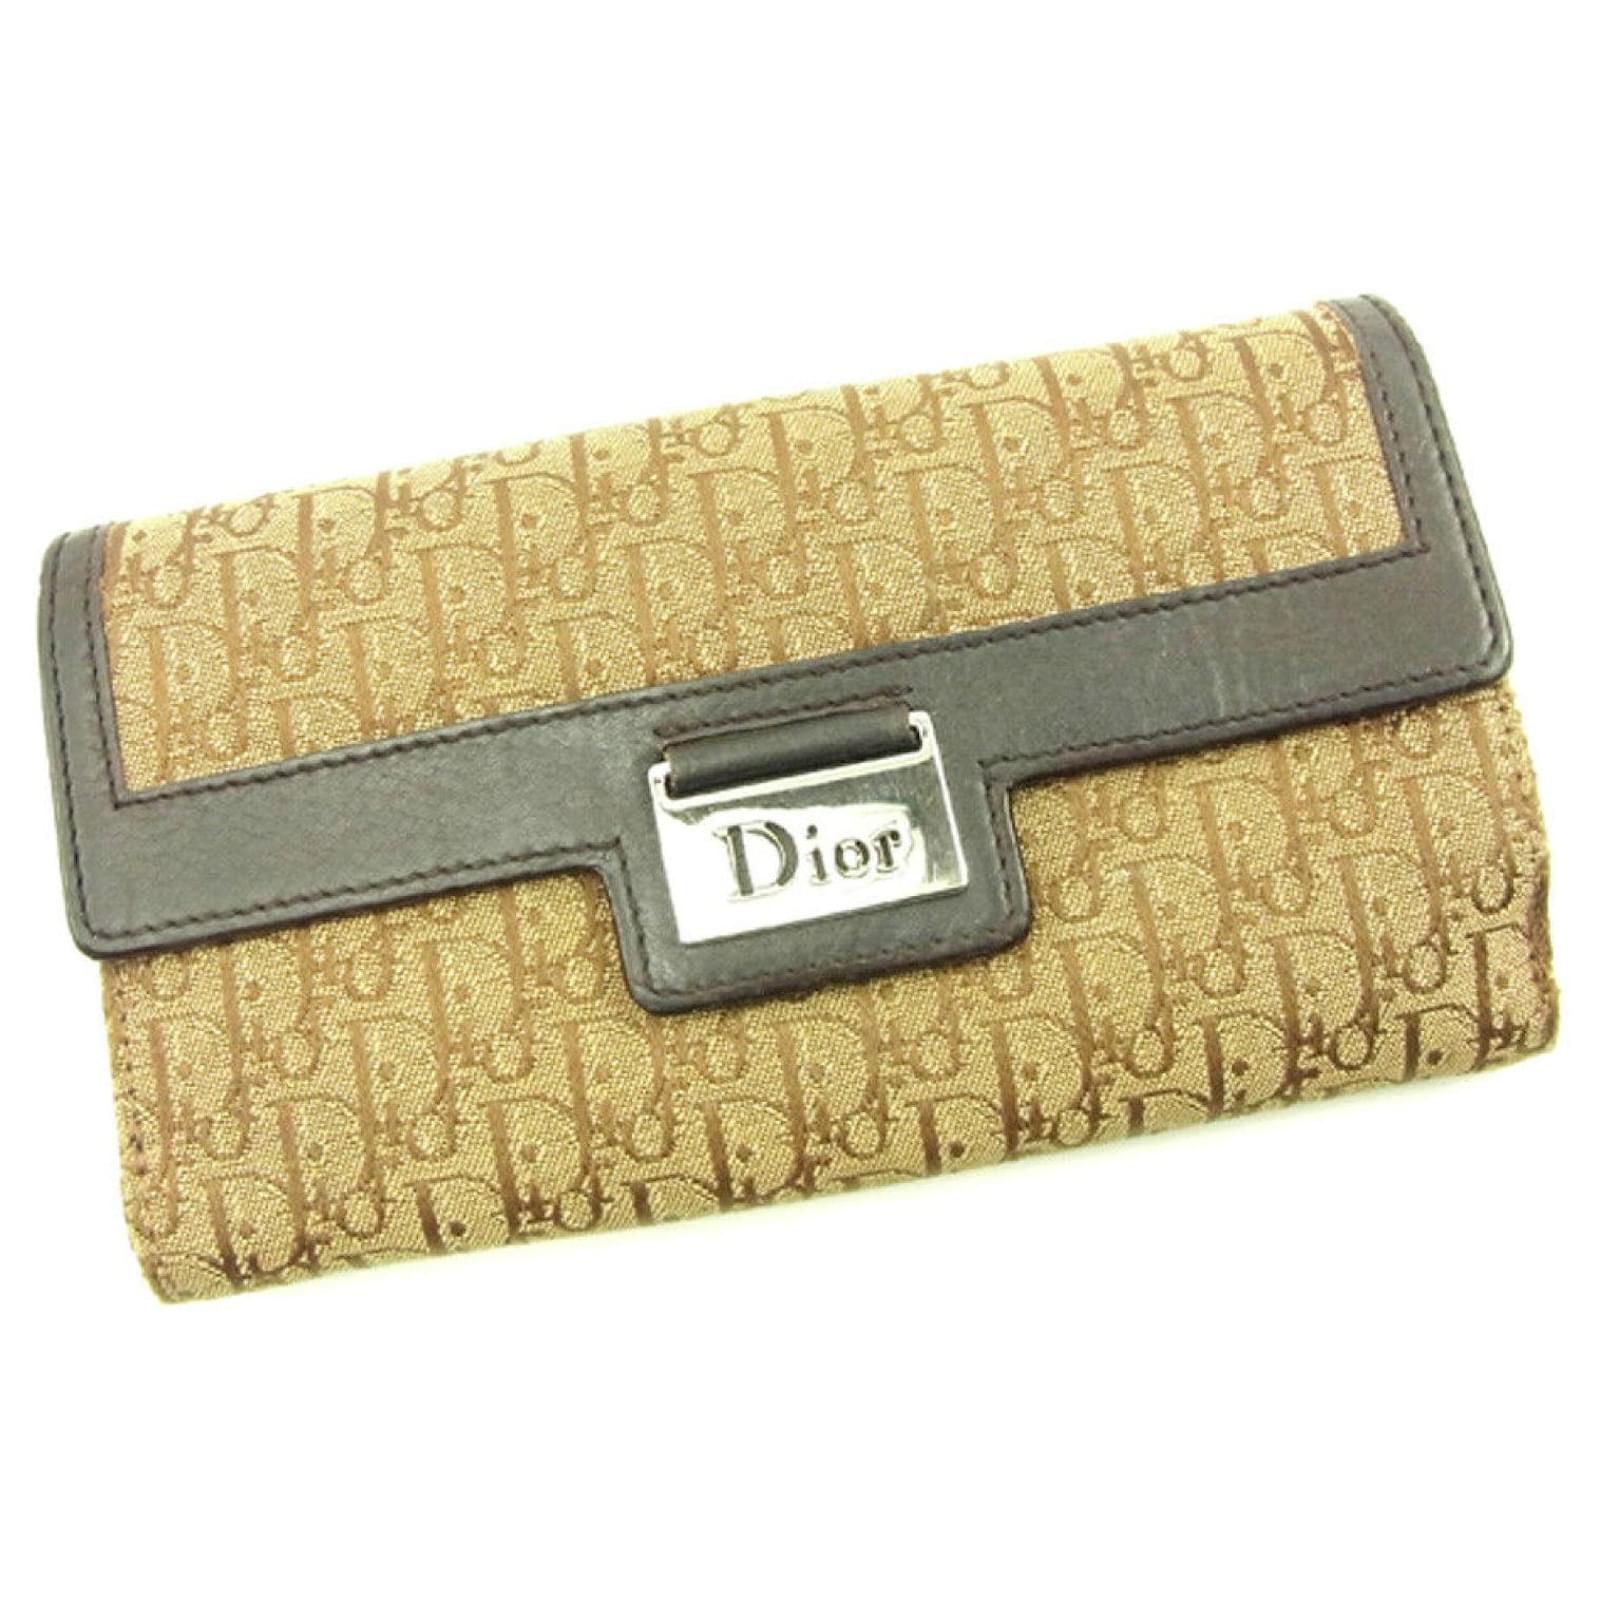 Christian Dior Wallets On Sale